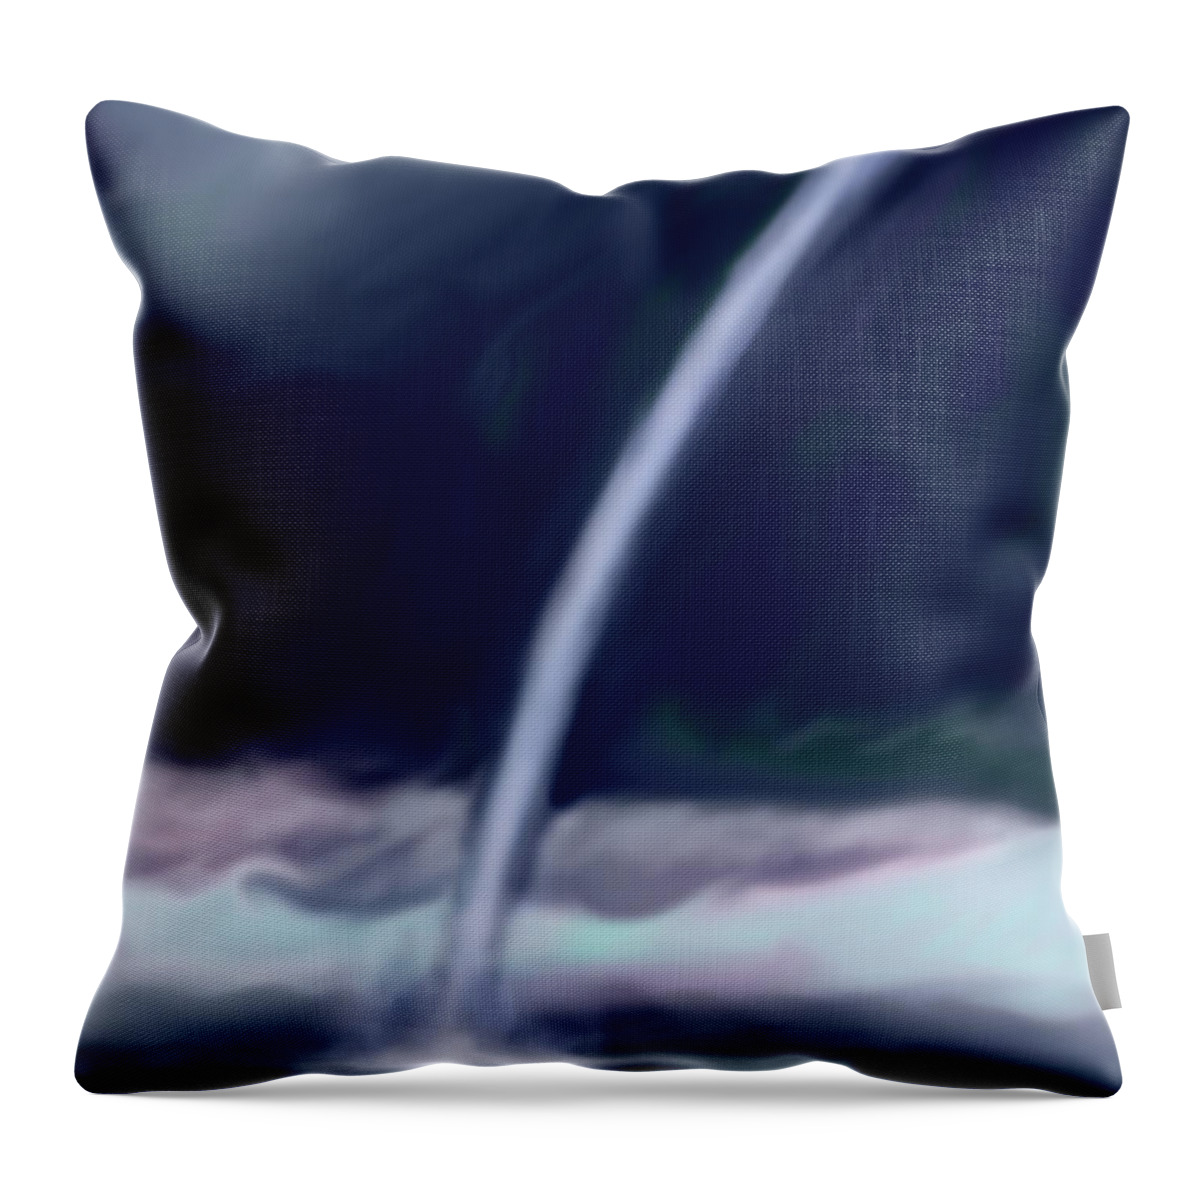 Waterspout Throw Pillow featuring the painting Waterspout by Jean Pacheco Ravinski